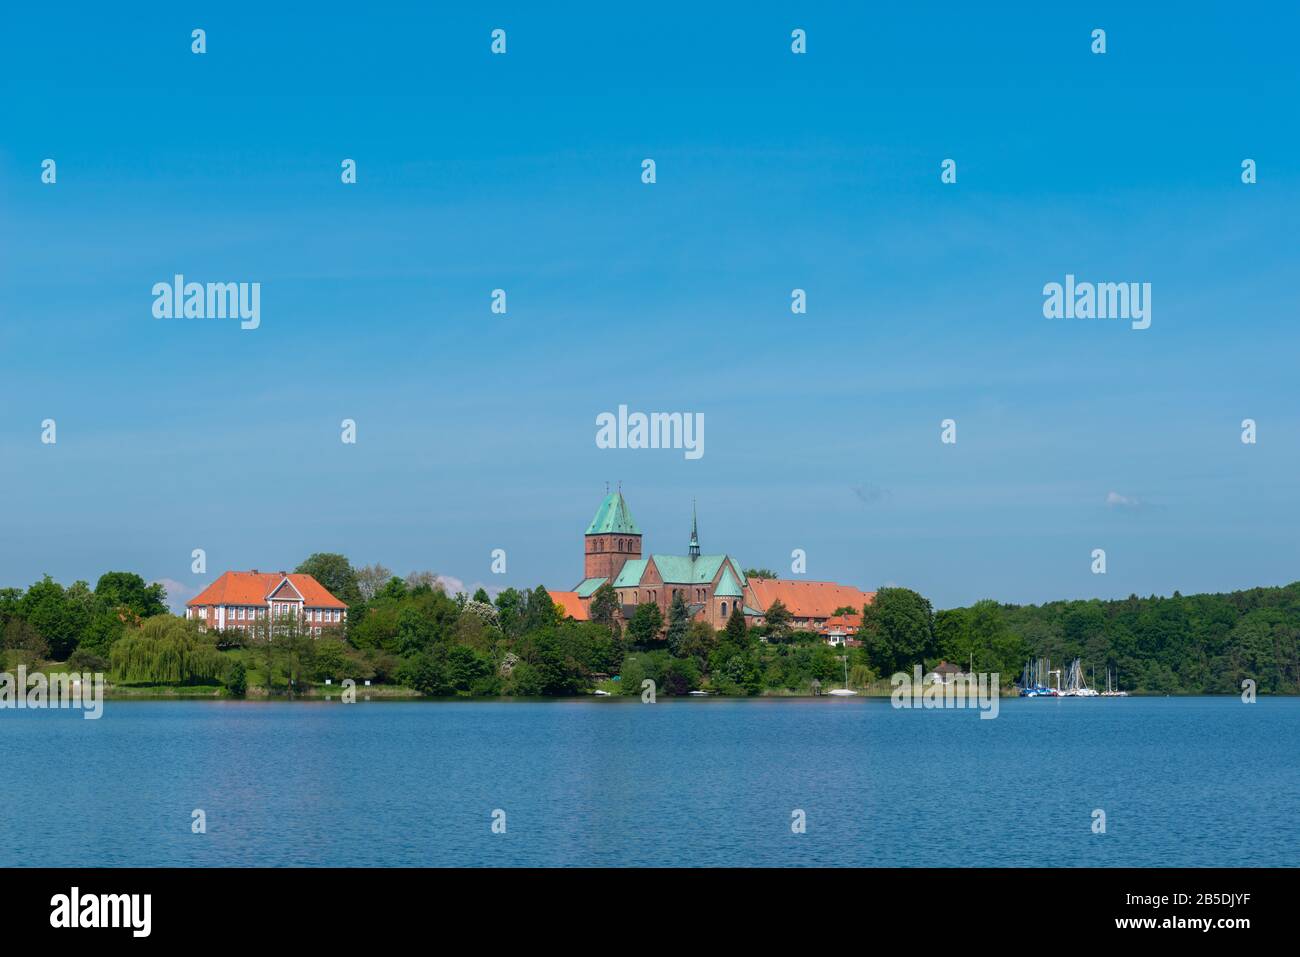 Lake Ratzeburg and town Ratzeburg with cathedral, Dukedom of Lauenburg, Schleswig-Holstein, North Germany, Central Europe Stock Photo